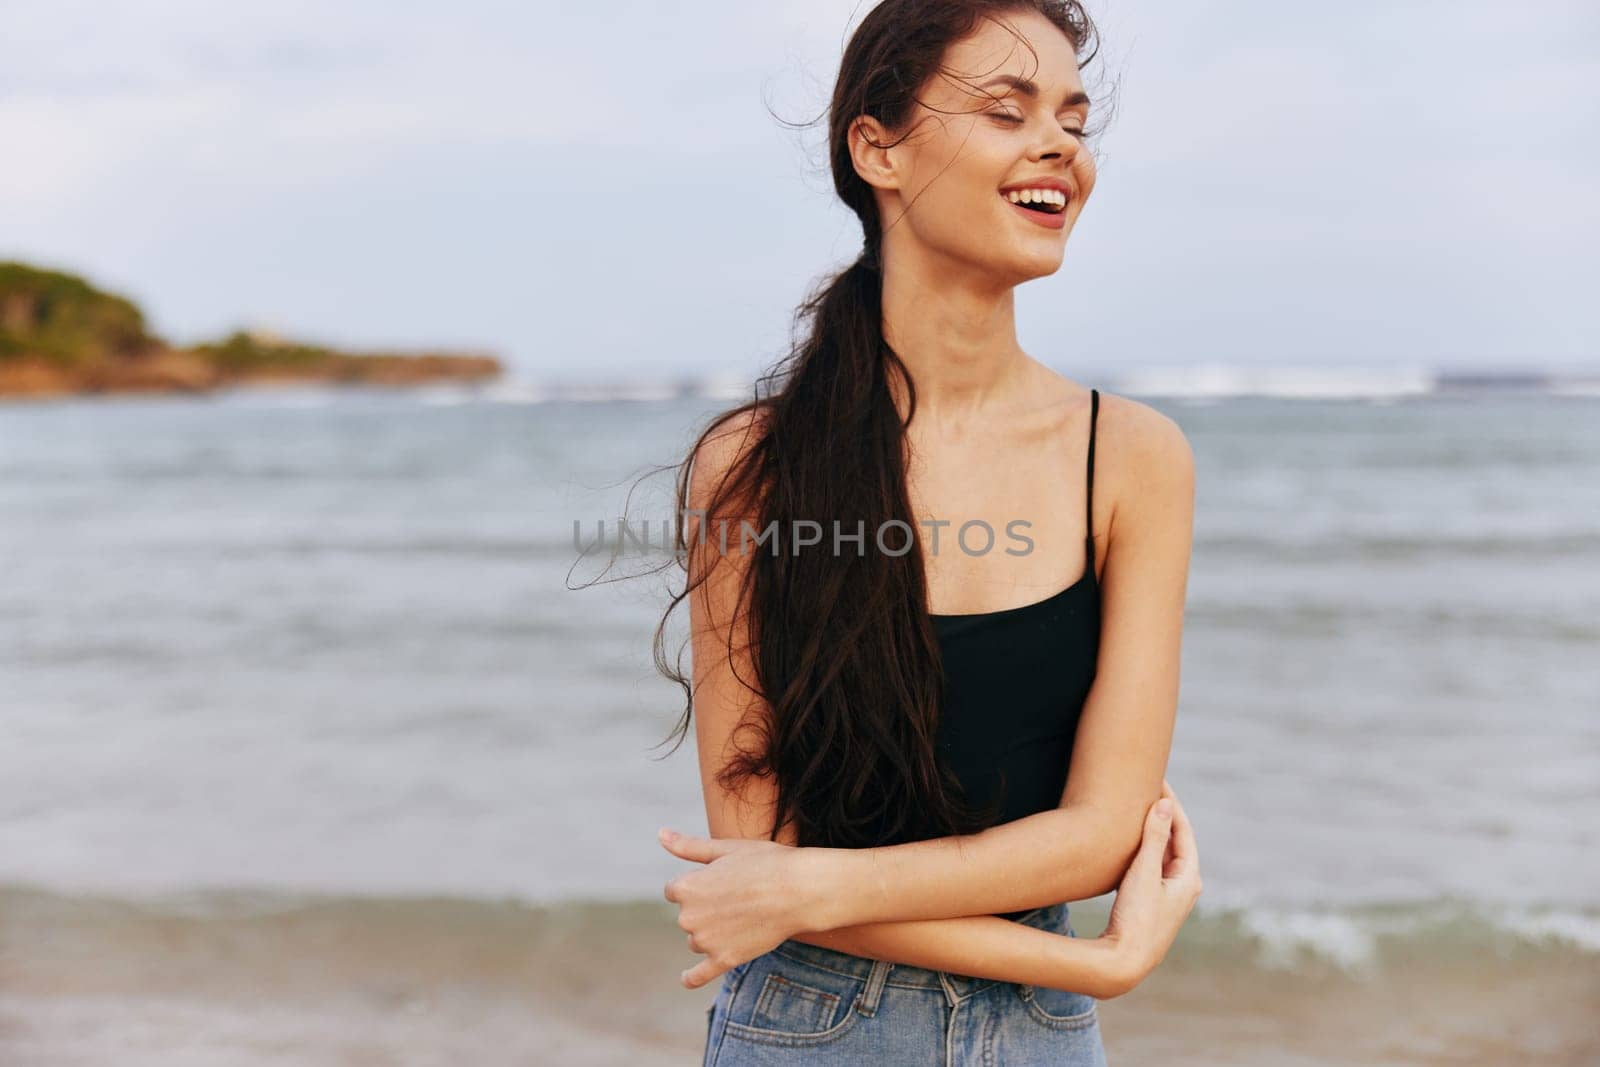 walking woman happiness coast summer running sunset lifestyle sand sea leisure beach vacation holiday sun dress young ocean sky smile happy